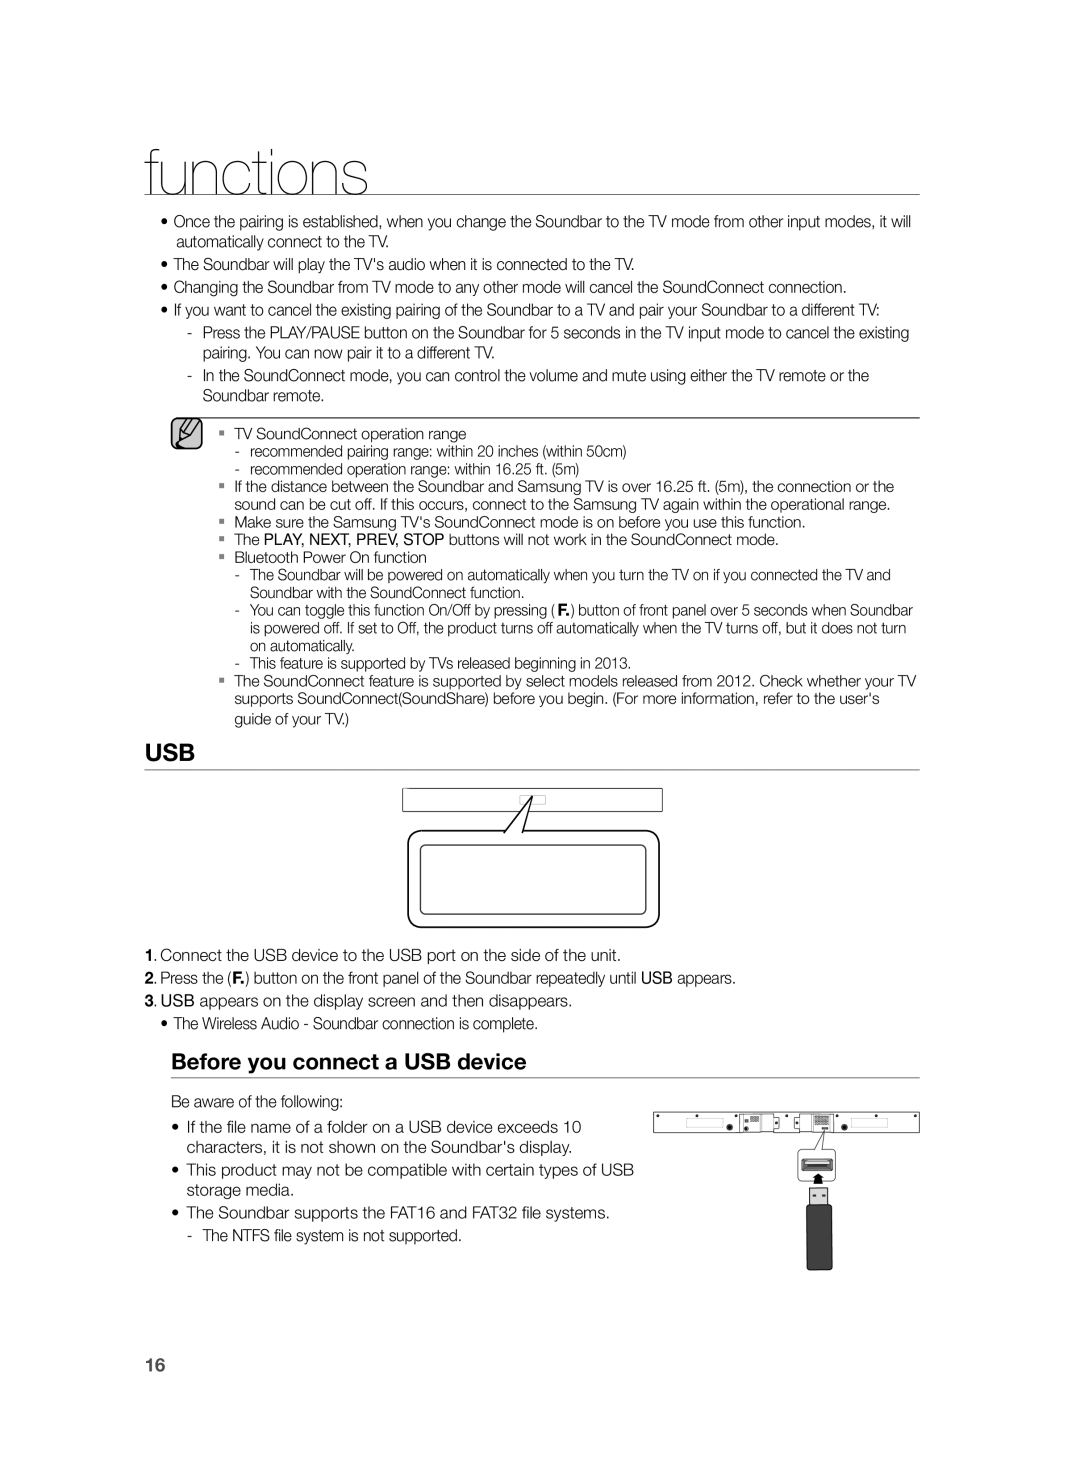 Samsung HW-H355/XE manual Before you connect a USB device, Be aware of the following 